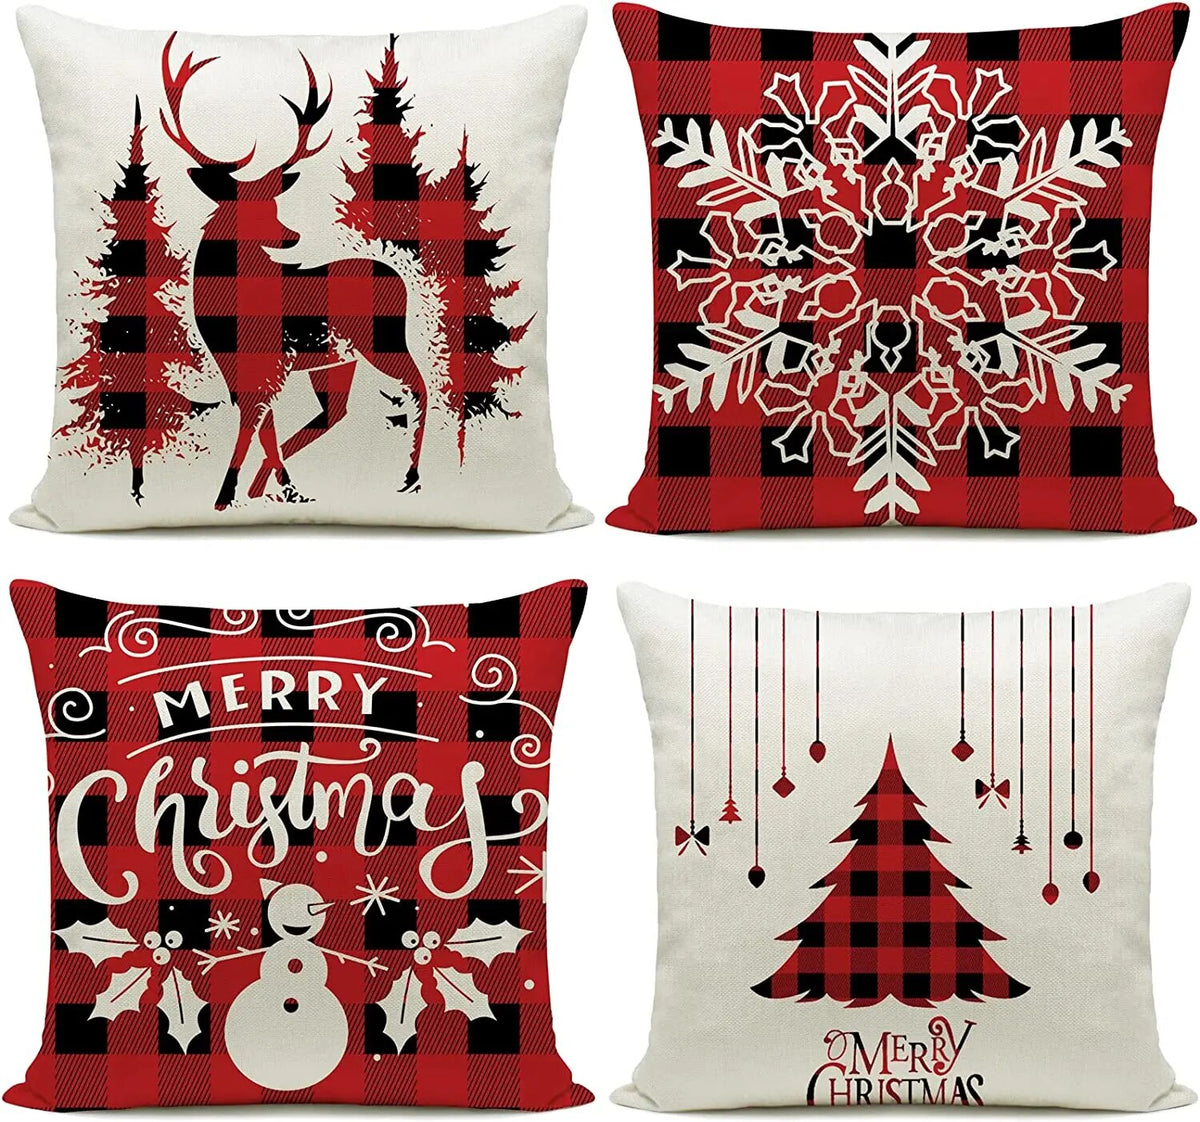 Square Christmas Pillows Covers 18x18 Inch Set of 4, Linen Throw Pillow New